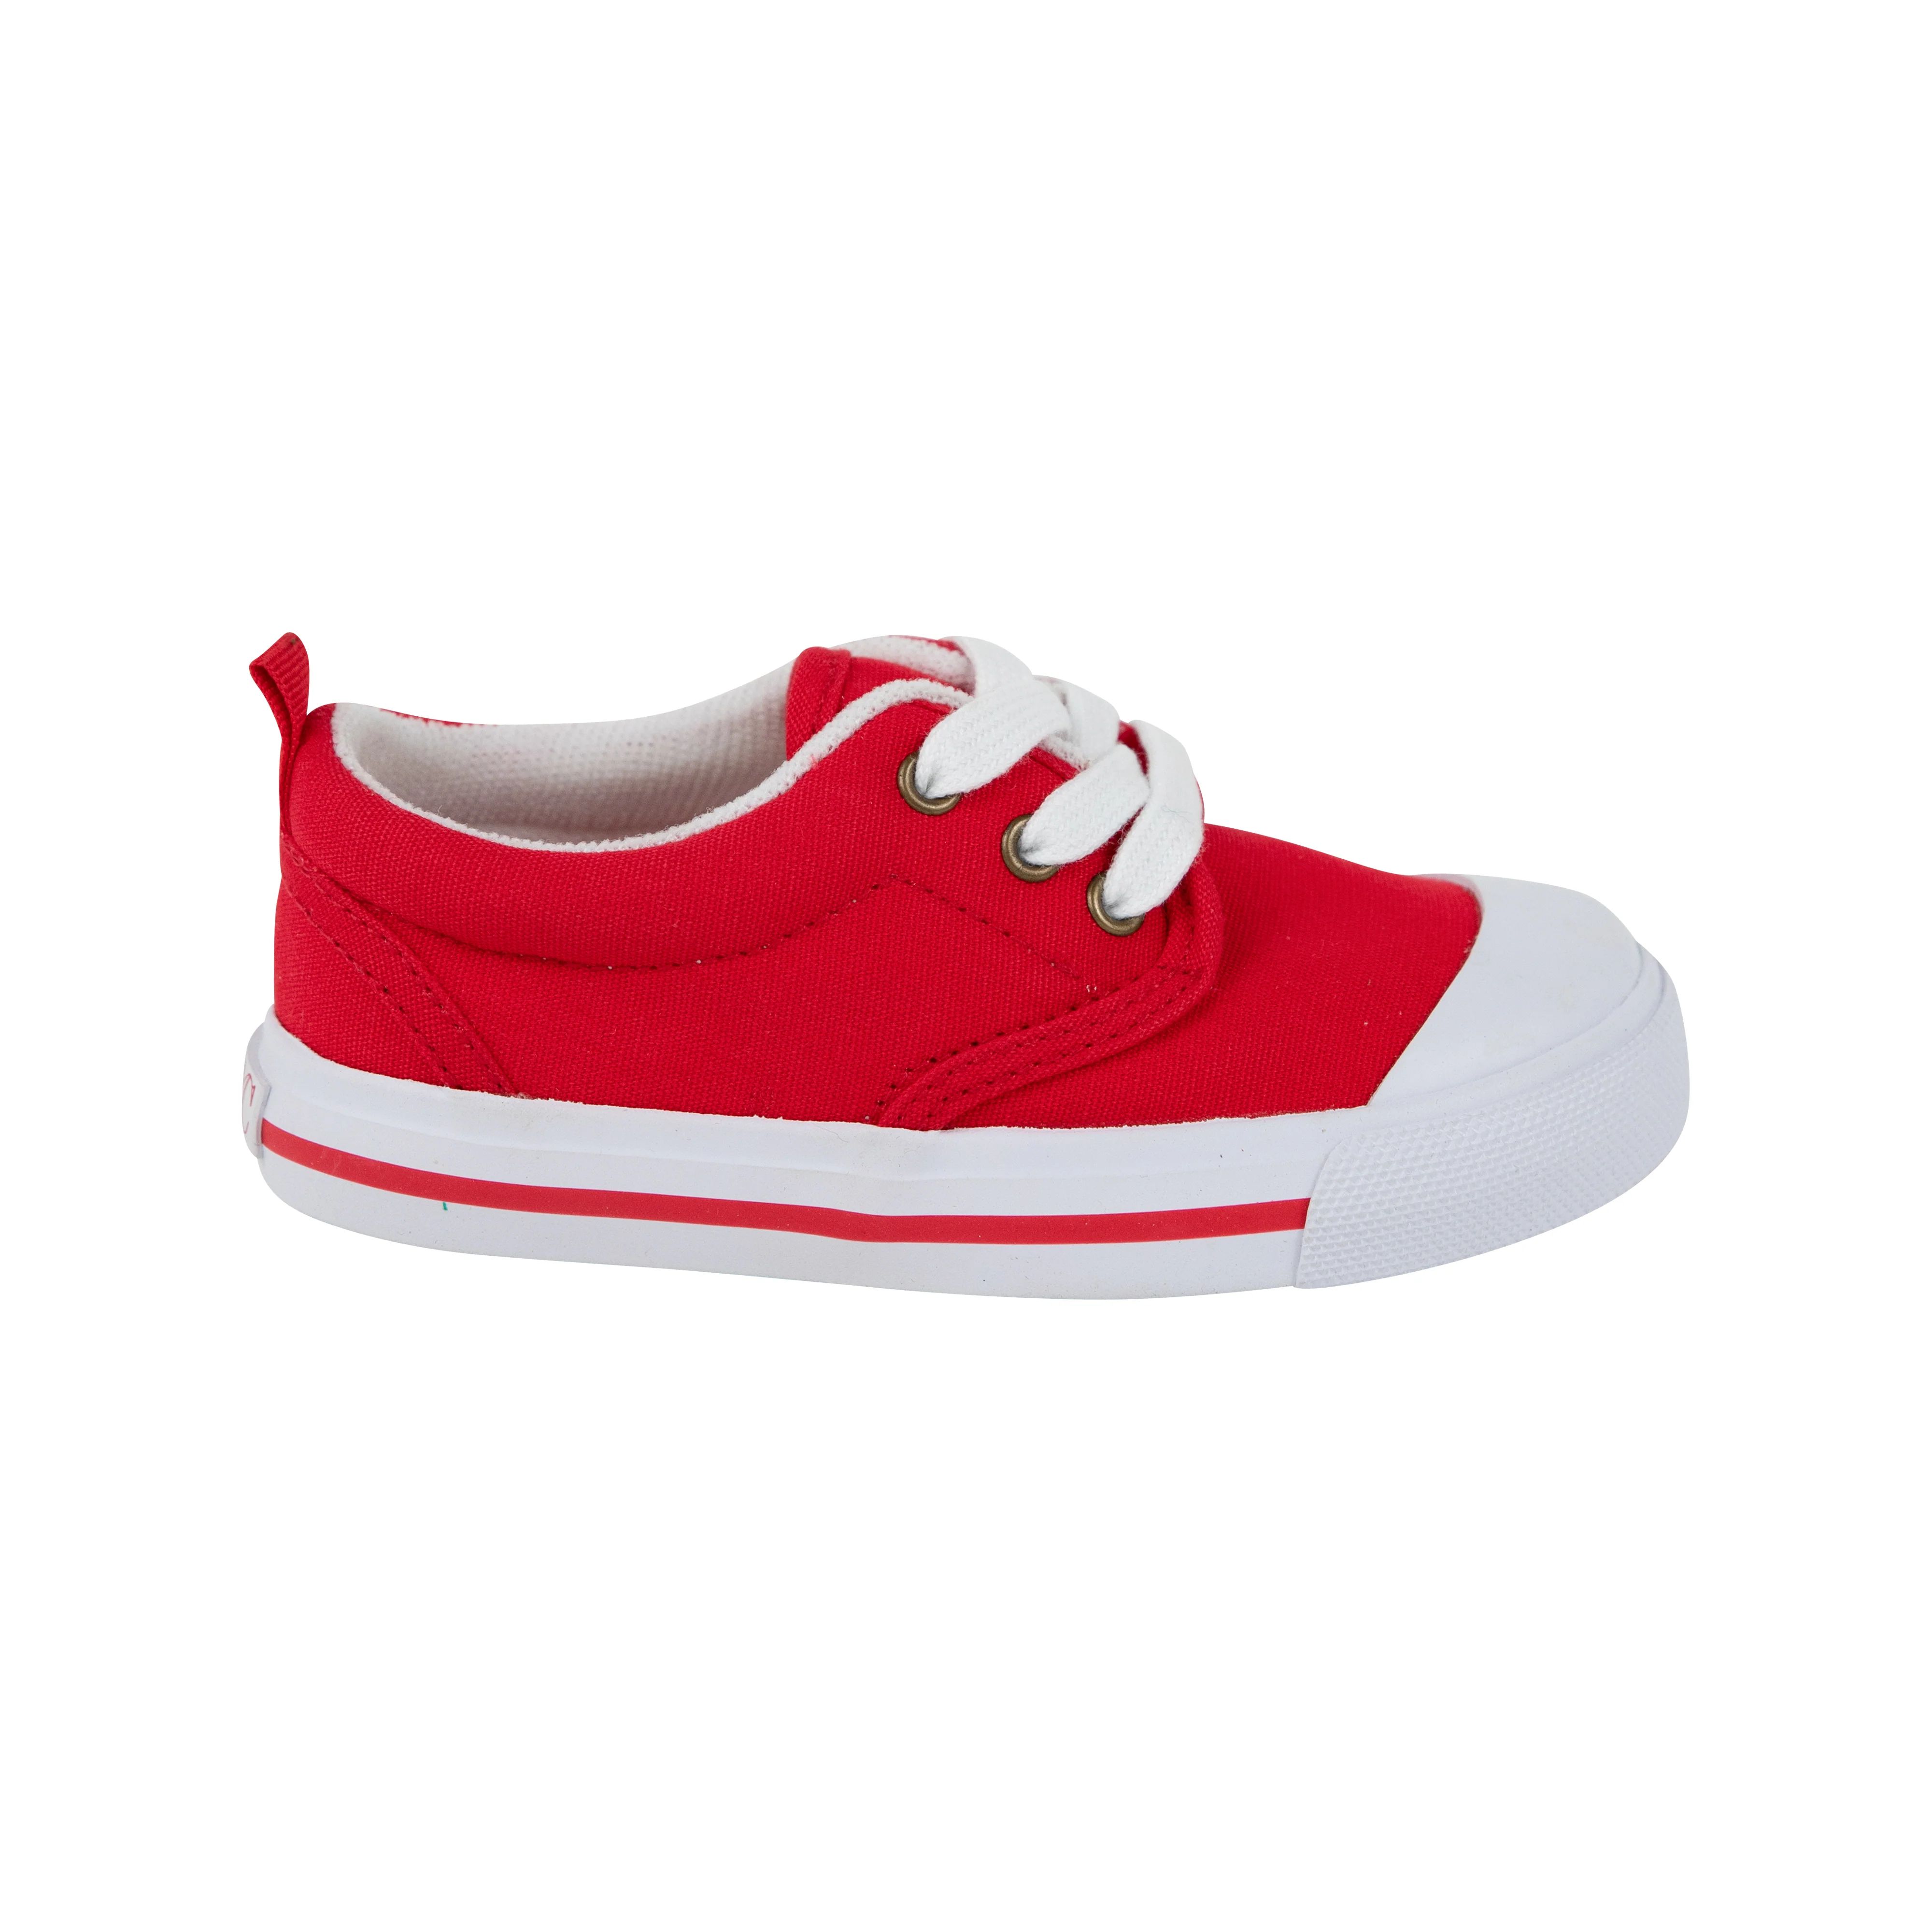 Prep Step Sneakers - Richmond Red with Richmond Red Stripe | The Beaufort Bonnet Company